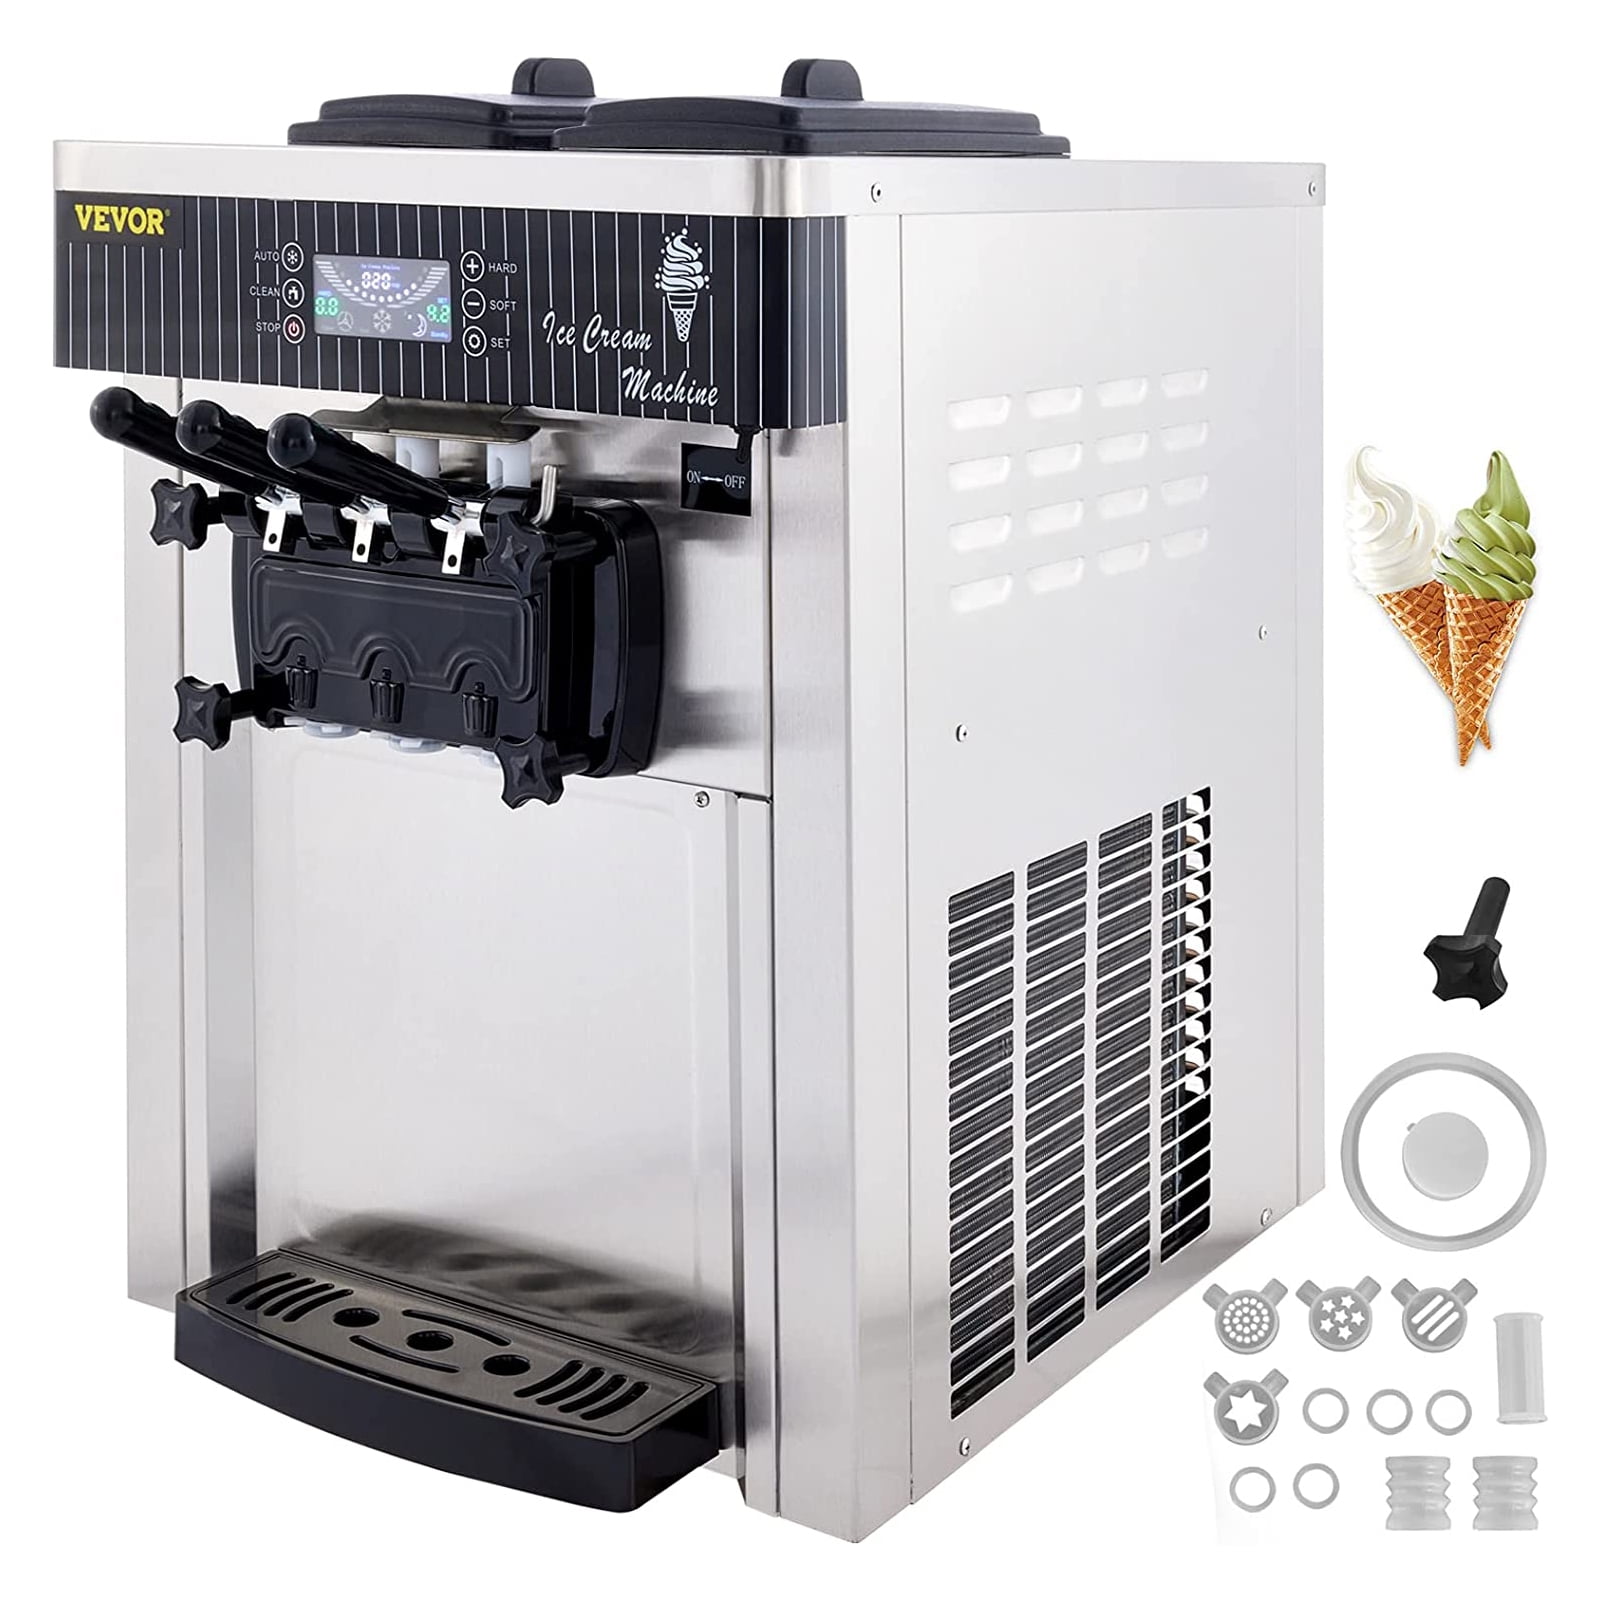 VEVORbrand Commercial Ice Cream Machine 20-28L/H Soft Serve LED Display Auto Clean Flavors 2200W for Snack Bar, Silver - Walmart.com